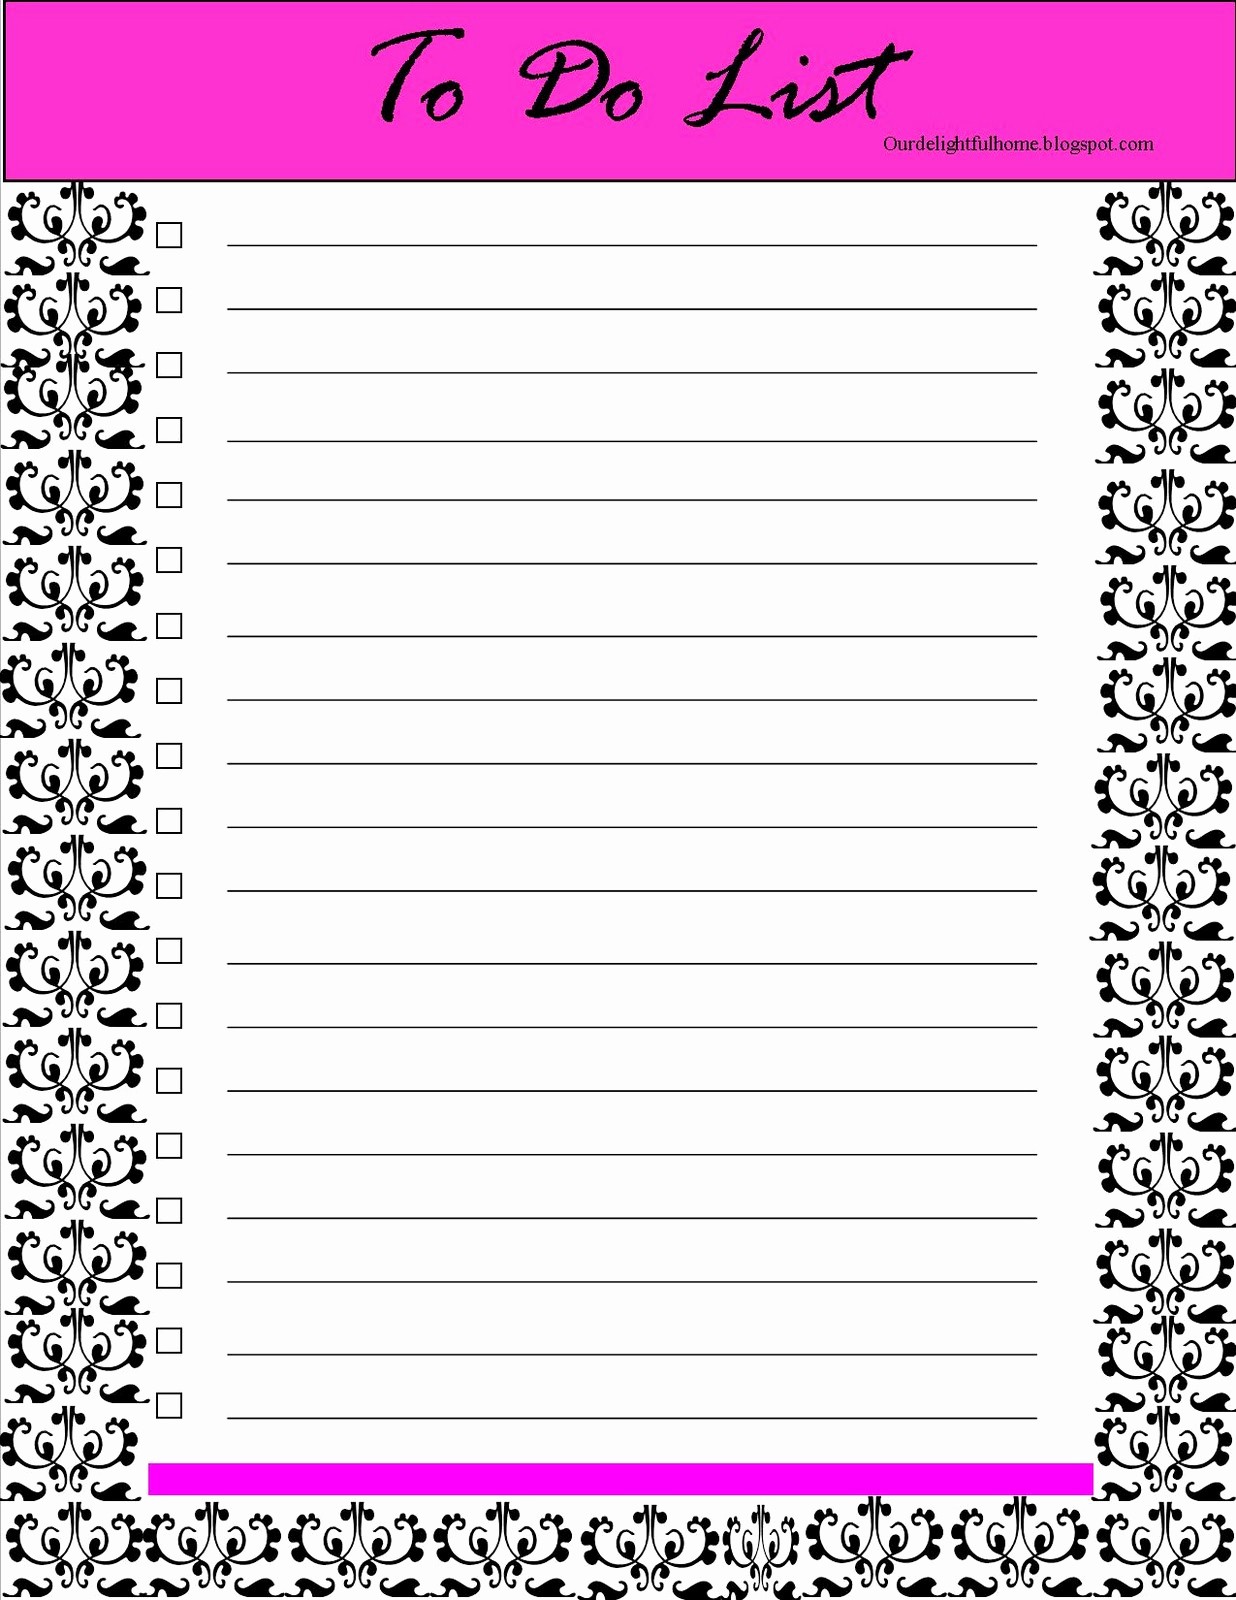 To Do List Templates Printable Lovely 6 Best Of to Do List Printable Editable Template